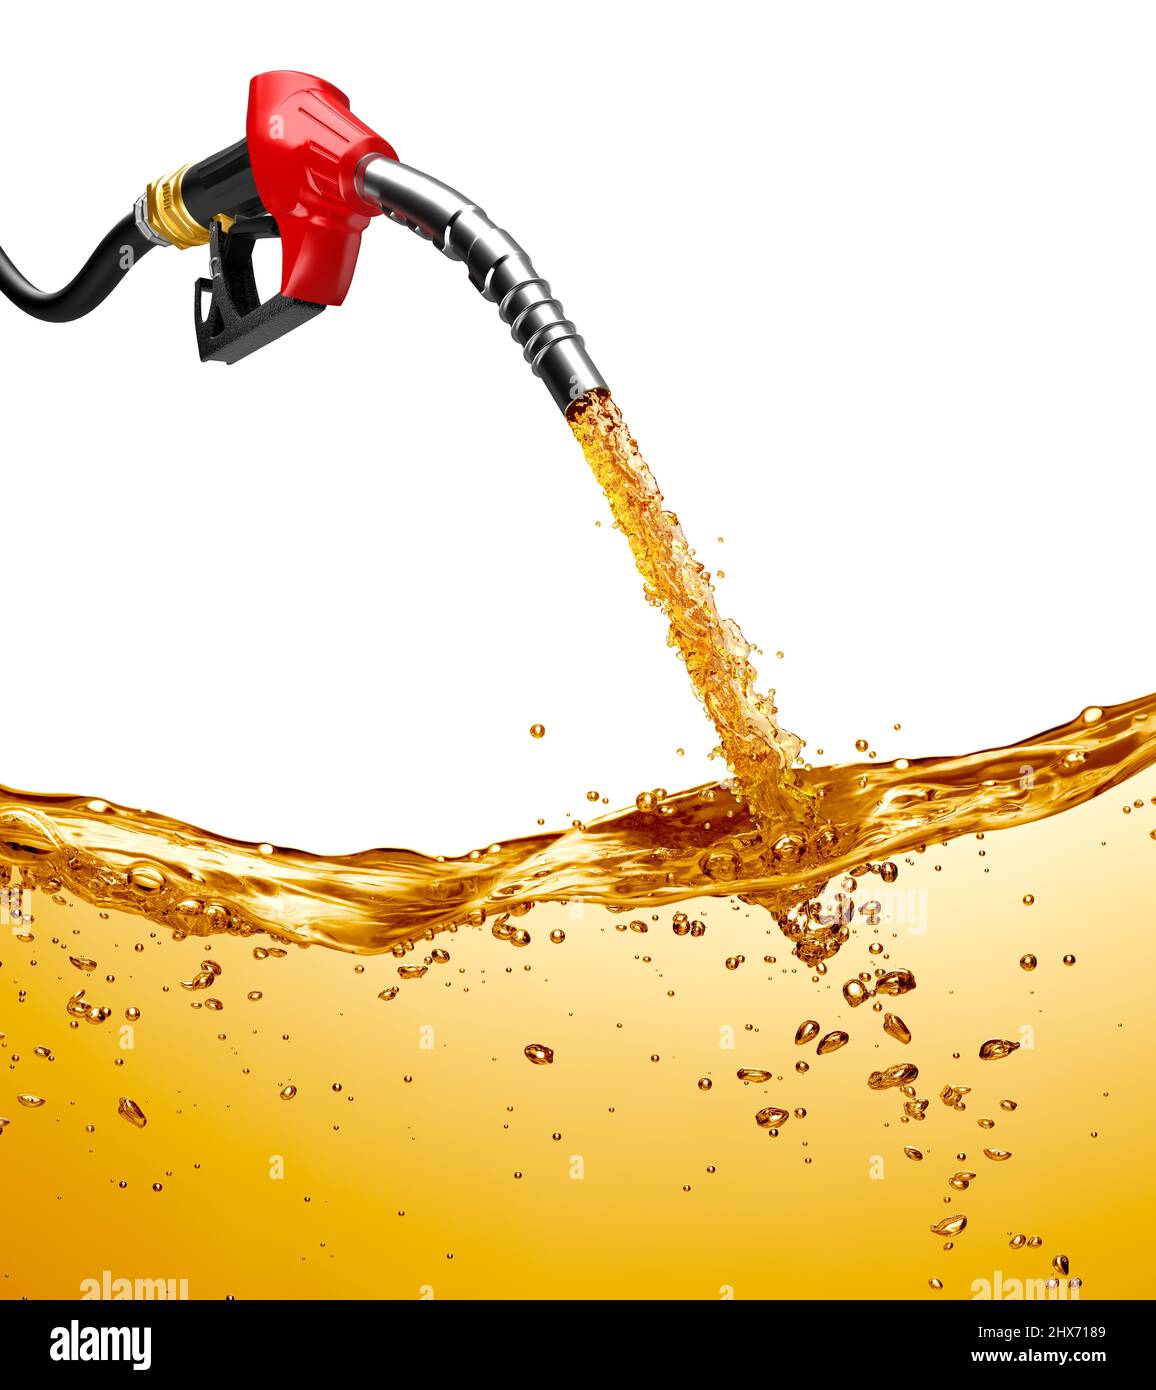 Fuel filling up from a gasoline pump - 3d Rendering Stock Photo